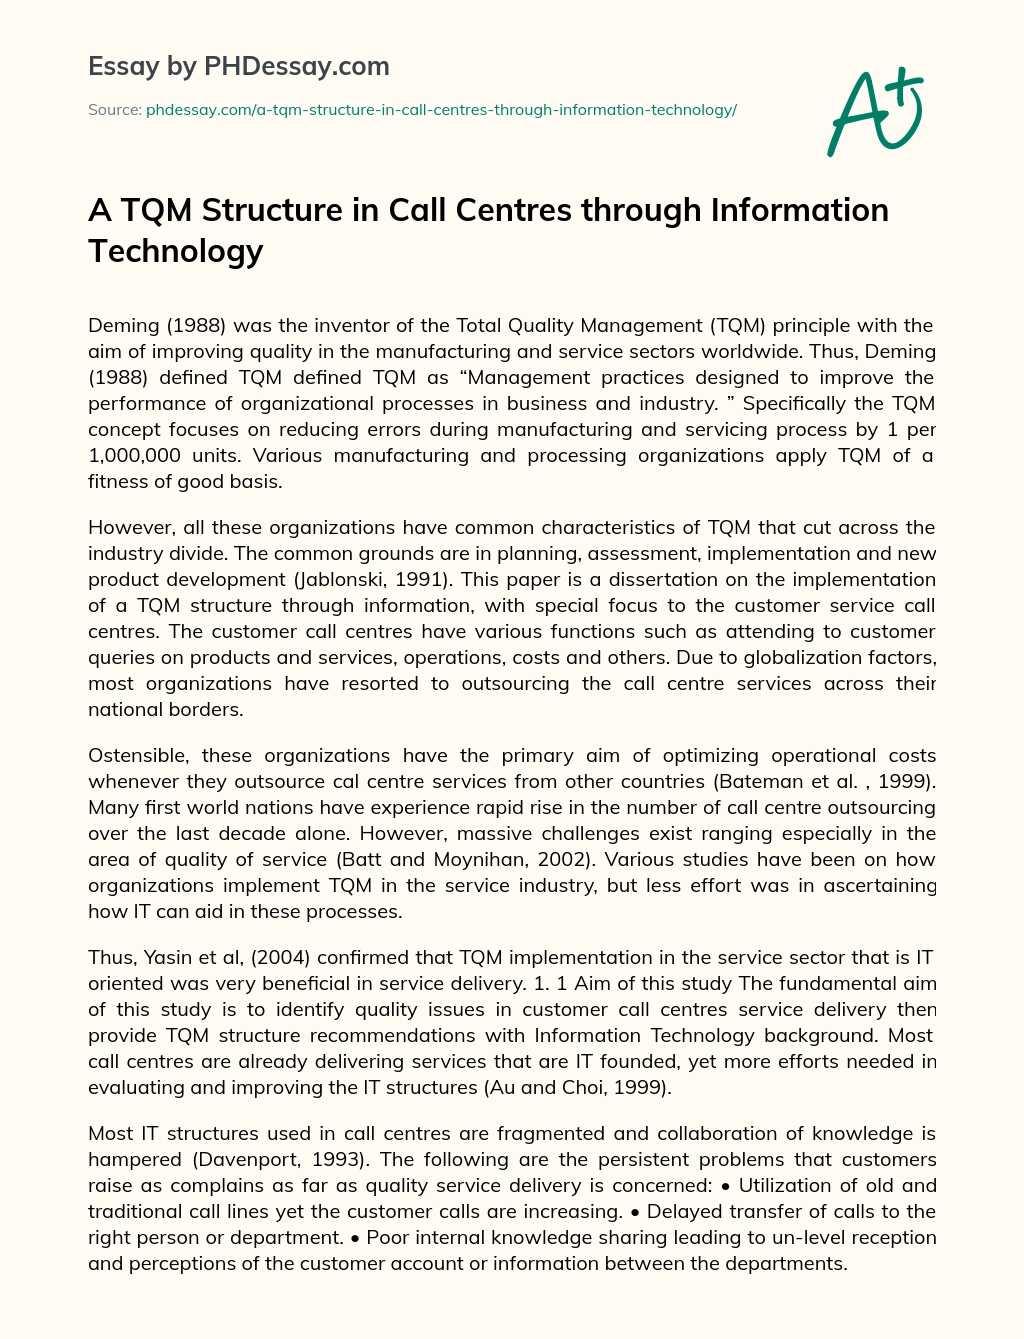 A TQM Structure in Call Centres through Information Technology essay